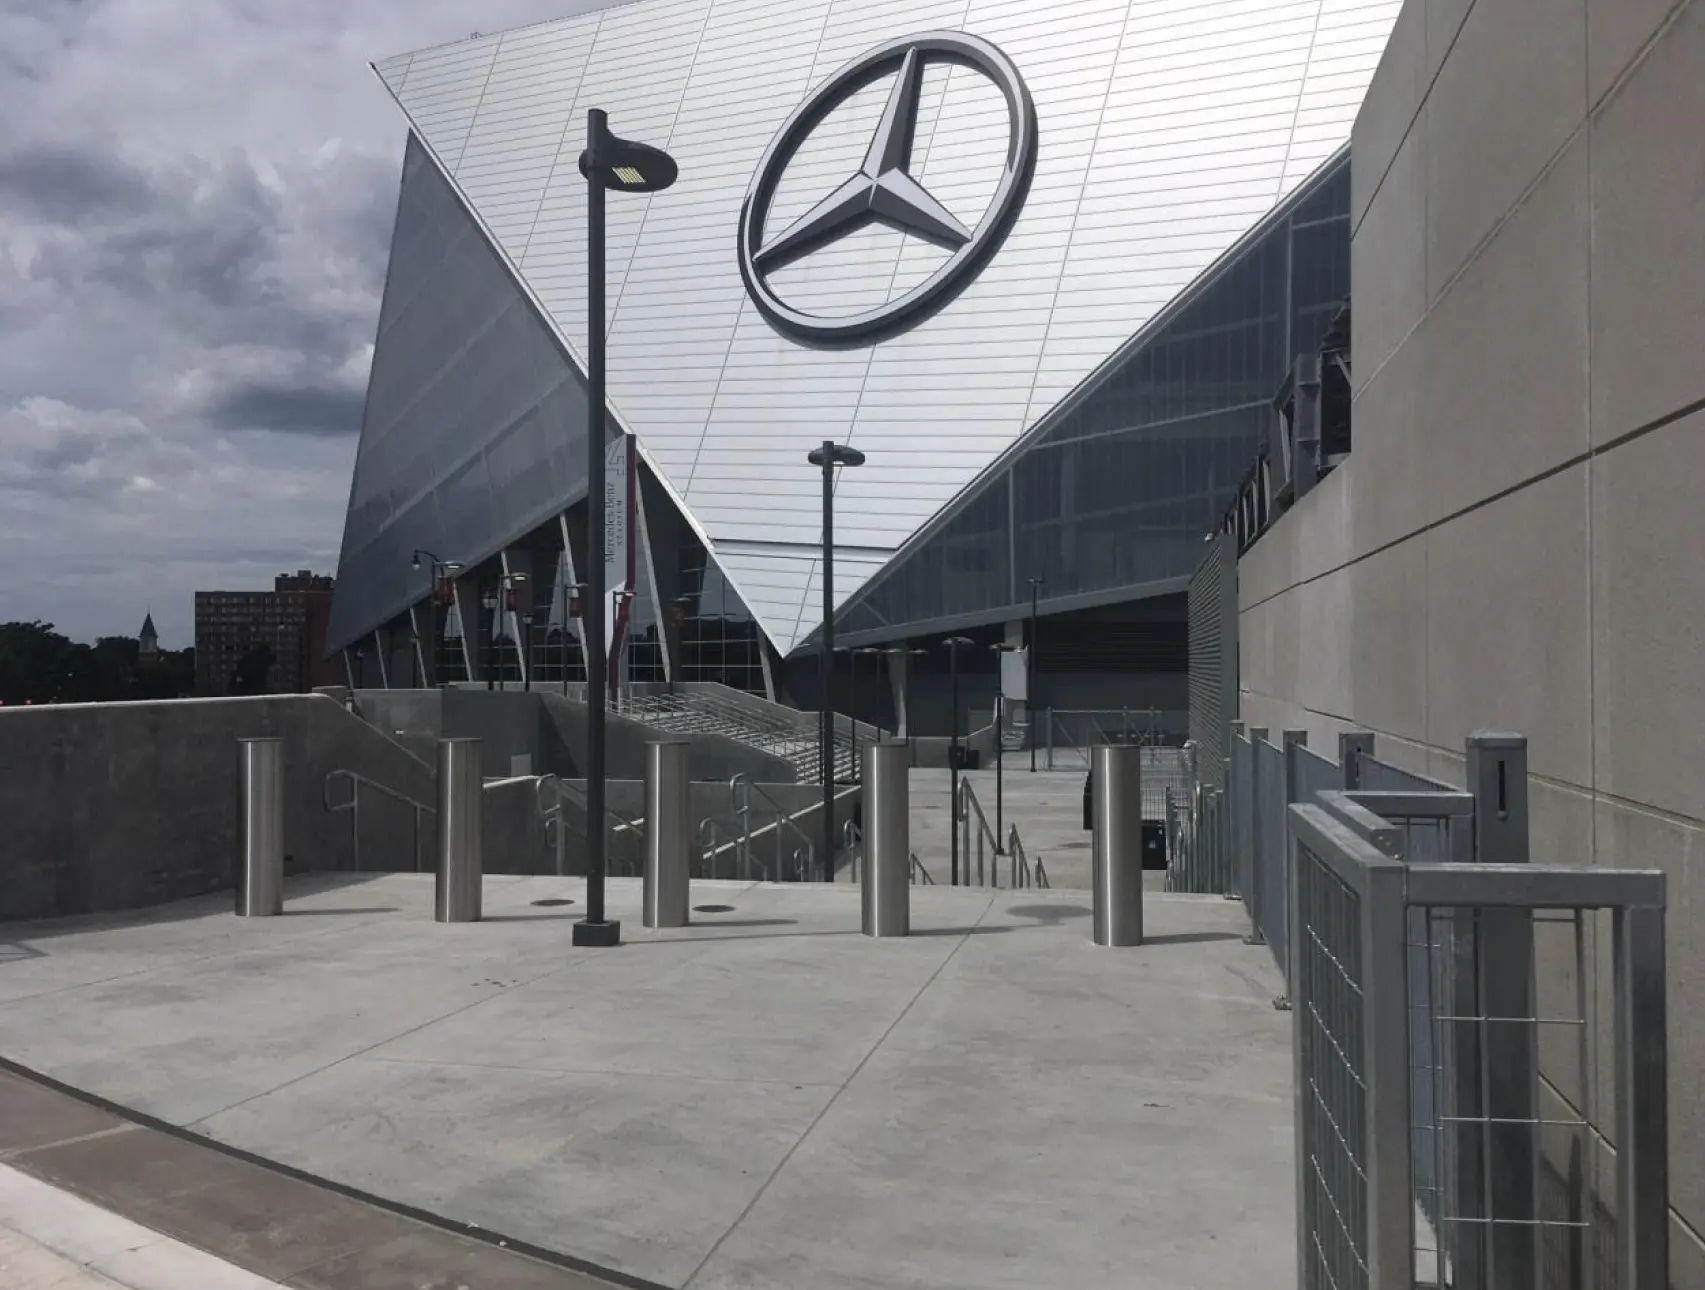 Delta Scientific bollards strategically placed at a stadium's entrance for heightened security, with the iconic Mercedes-Benz logo adorning the modern facade, showcasing commitment to protecting high-profile venues.